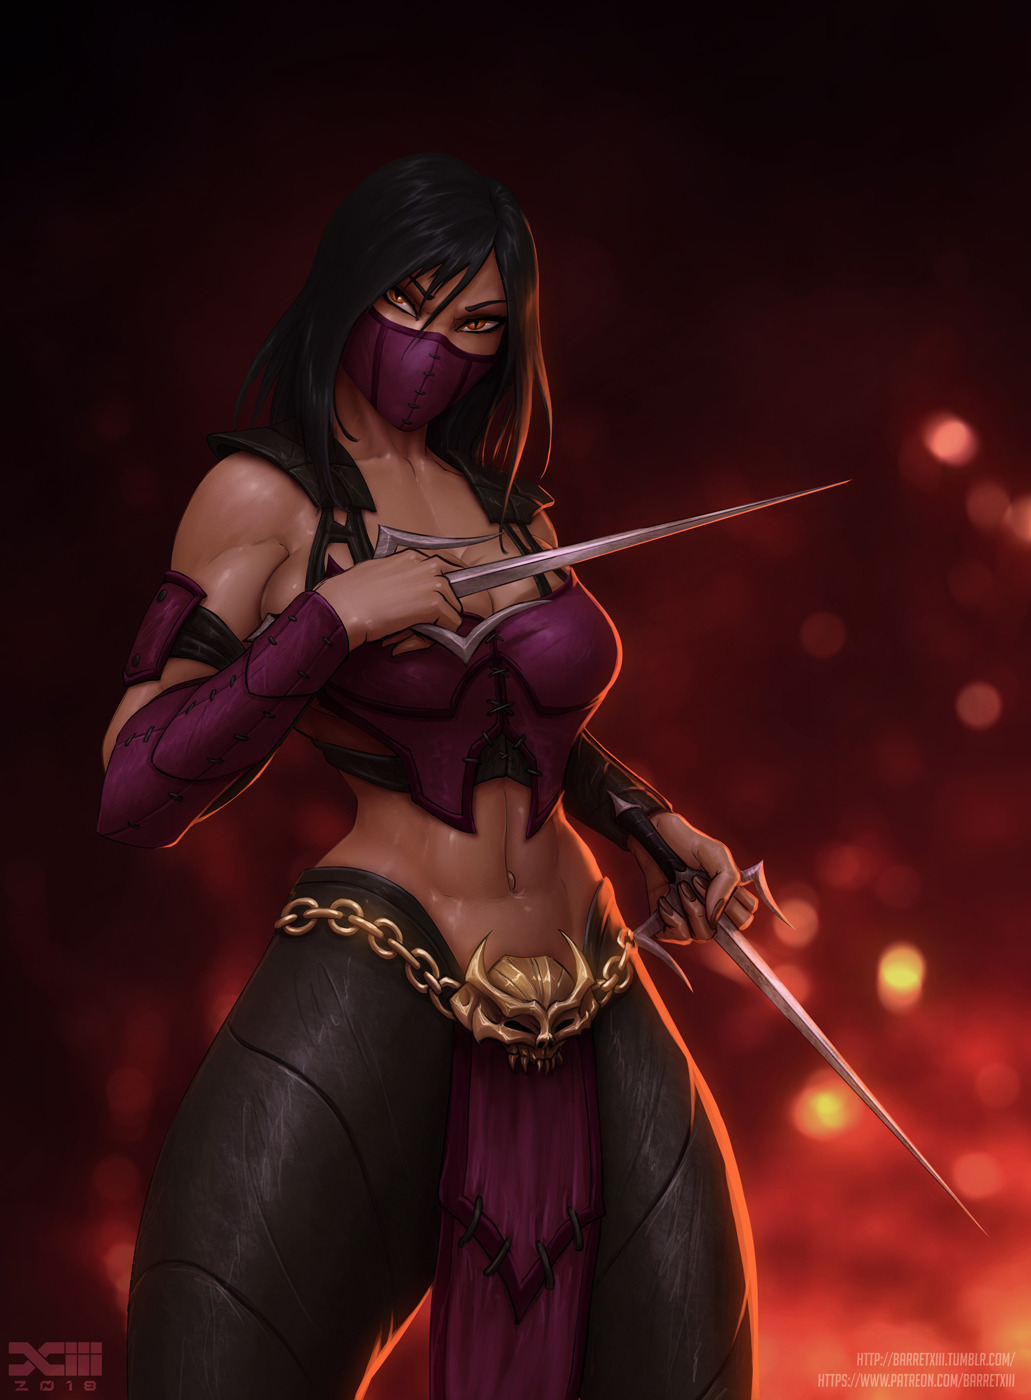 barretxiii: Newest addition to Barr’s Mares! Mileena, from Mortal Kombat! Please